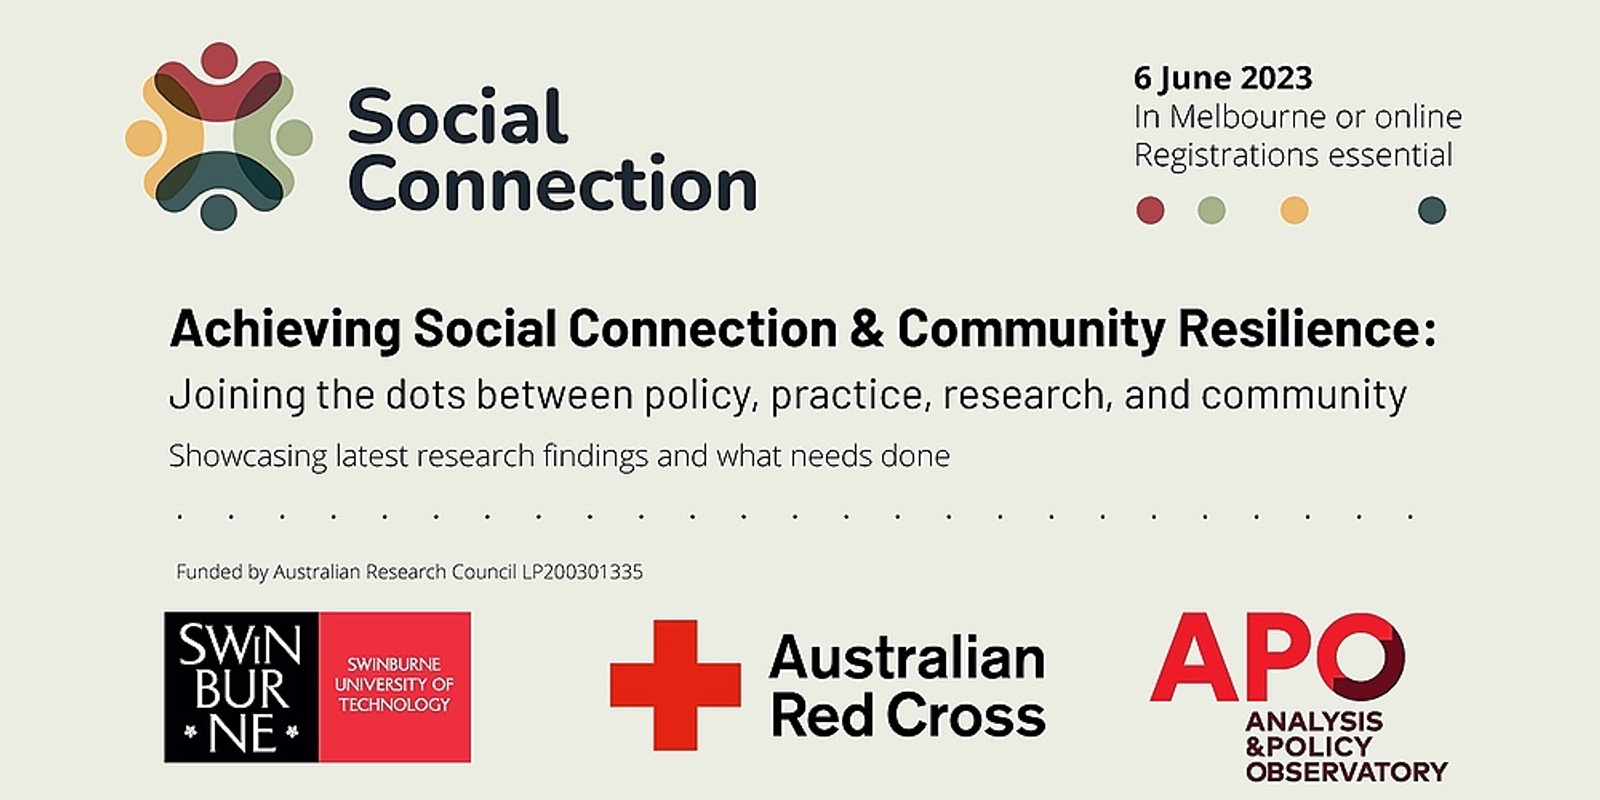 Achieving Social Connection & Community Resilience: joining the dots between policy, practice, research and community